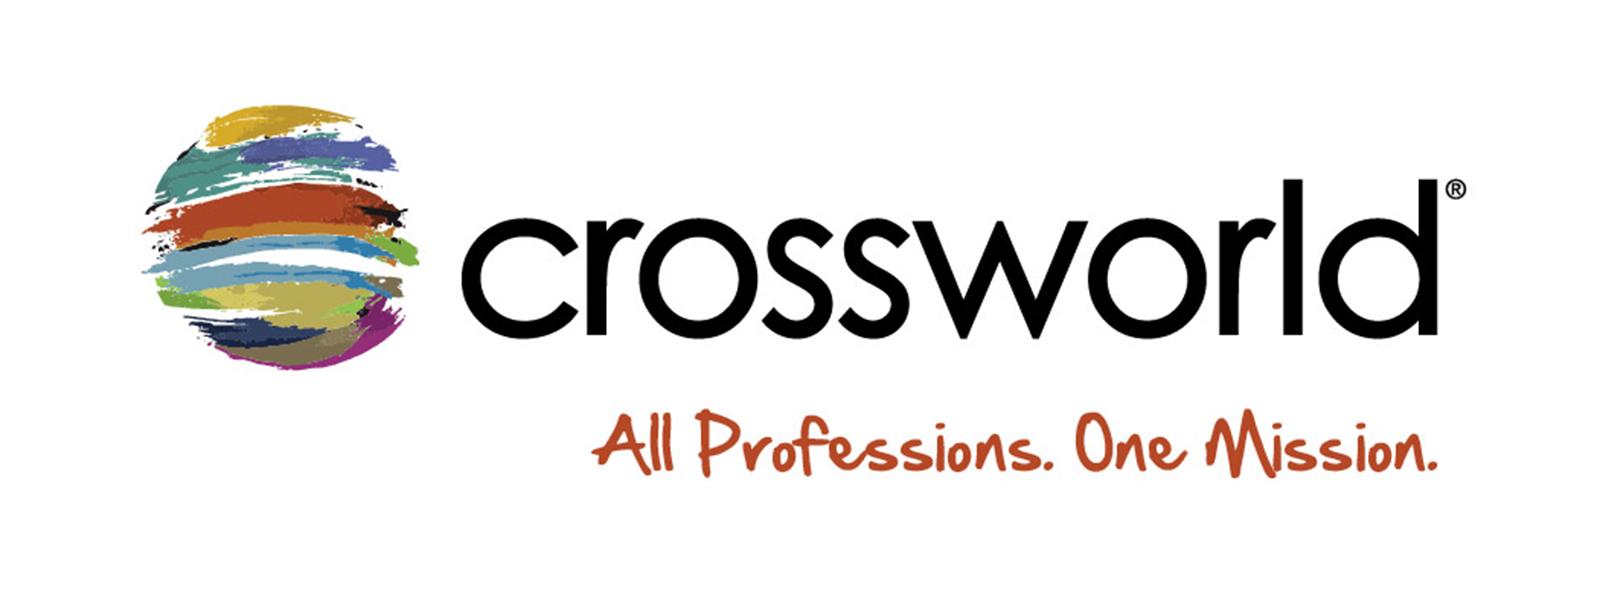 Crossworld brings together disciple-makers from a variety of professions to the world’s least-reached marketplaces. 